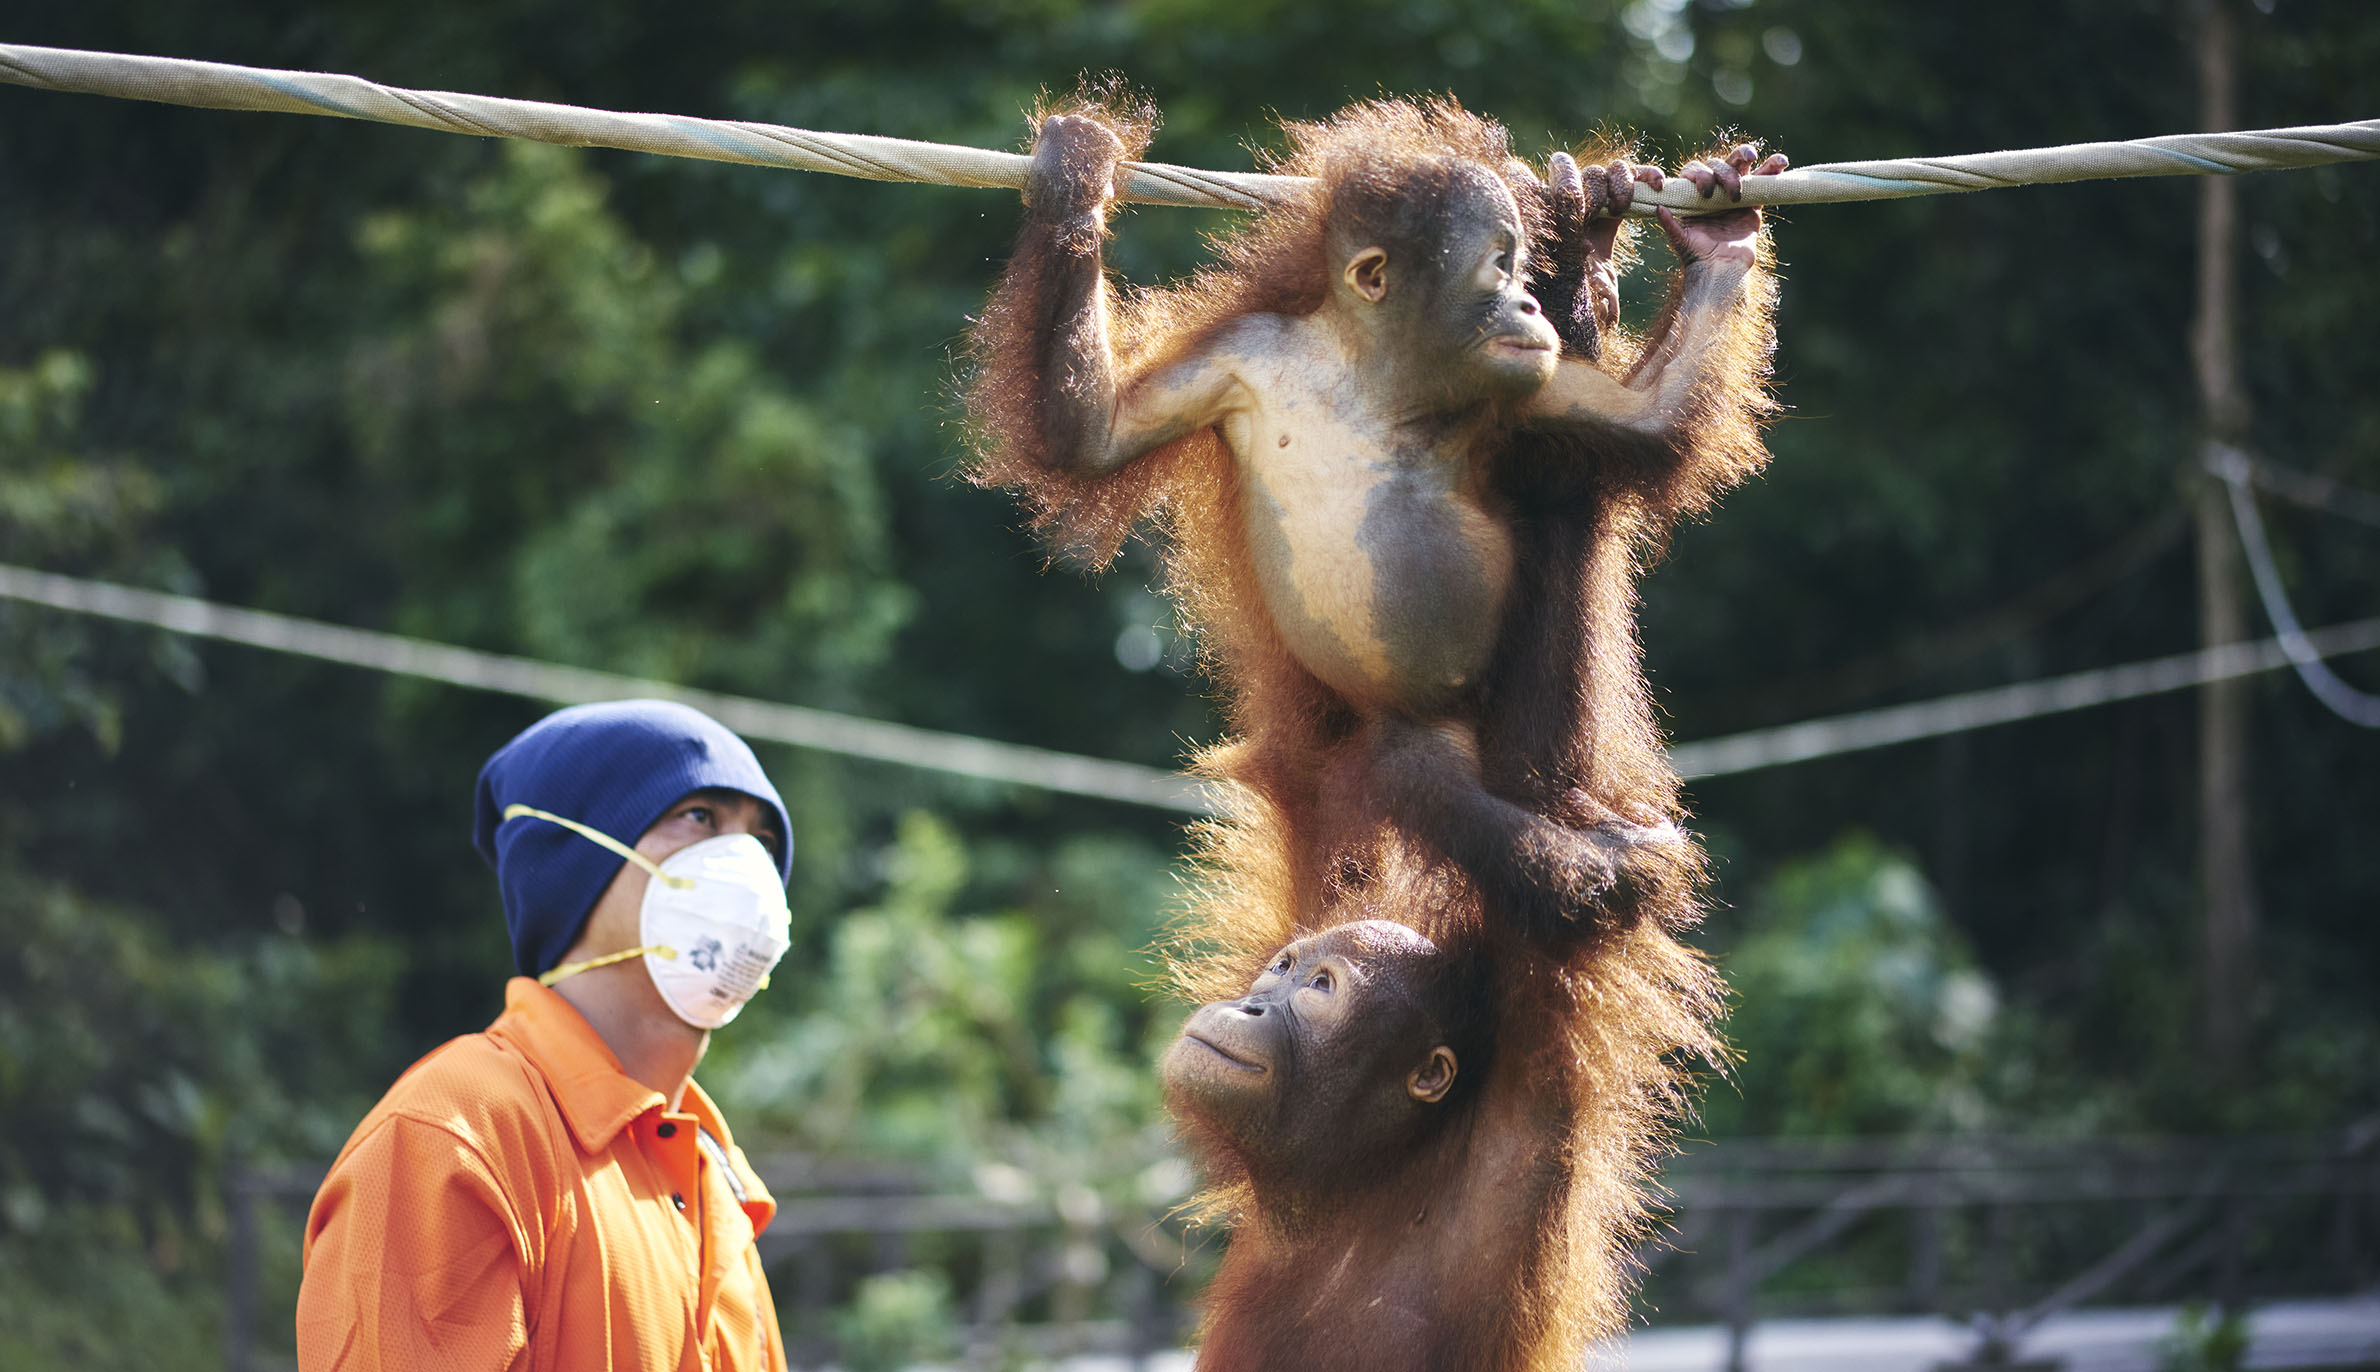 A photograph of orphaned orangutans practicing how to cross a tightrope taken on Borneo Island.